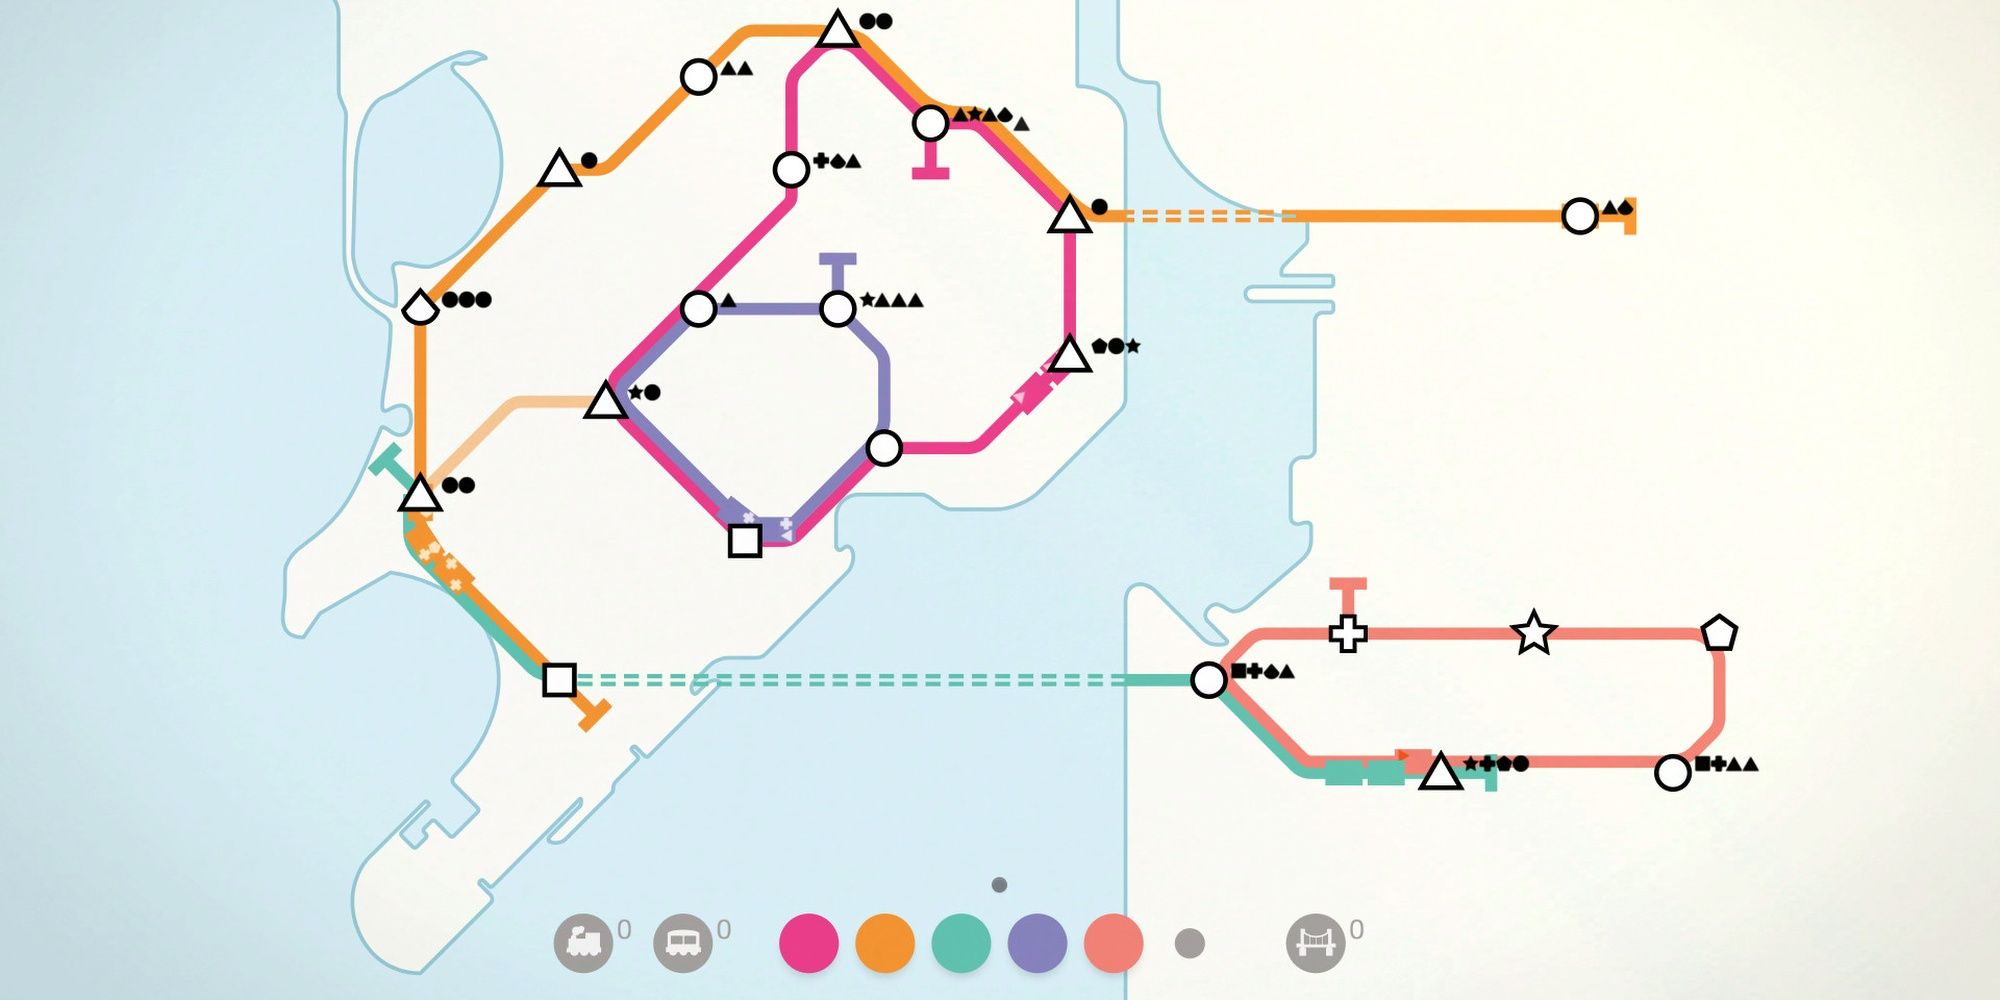 Mini Metro: Railway Lines Of A Simplified City Map